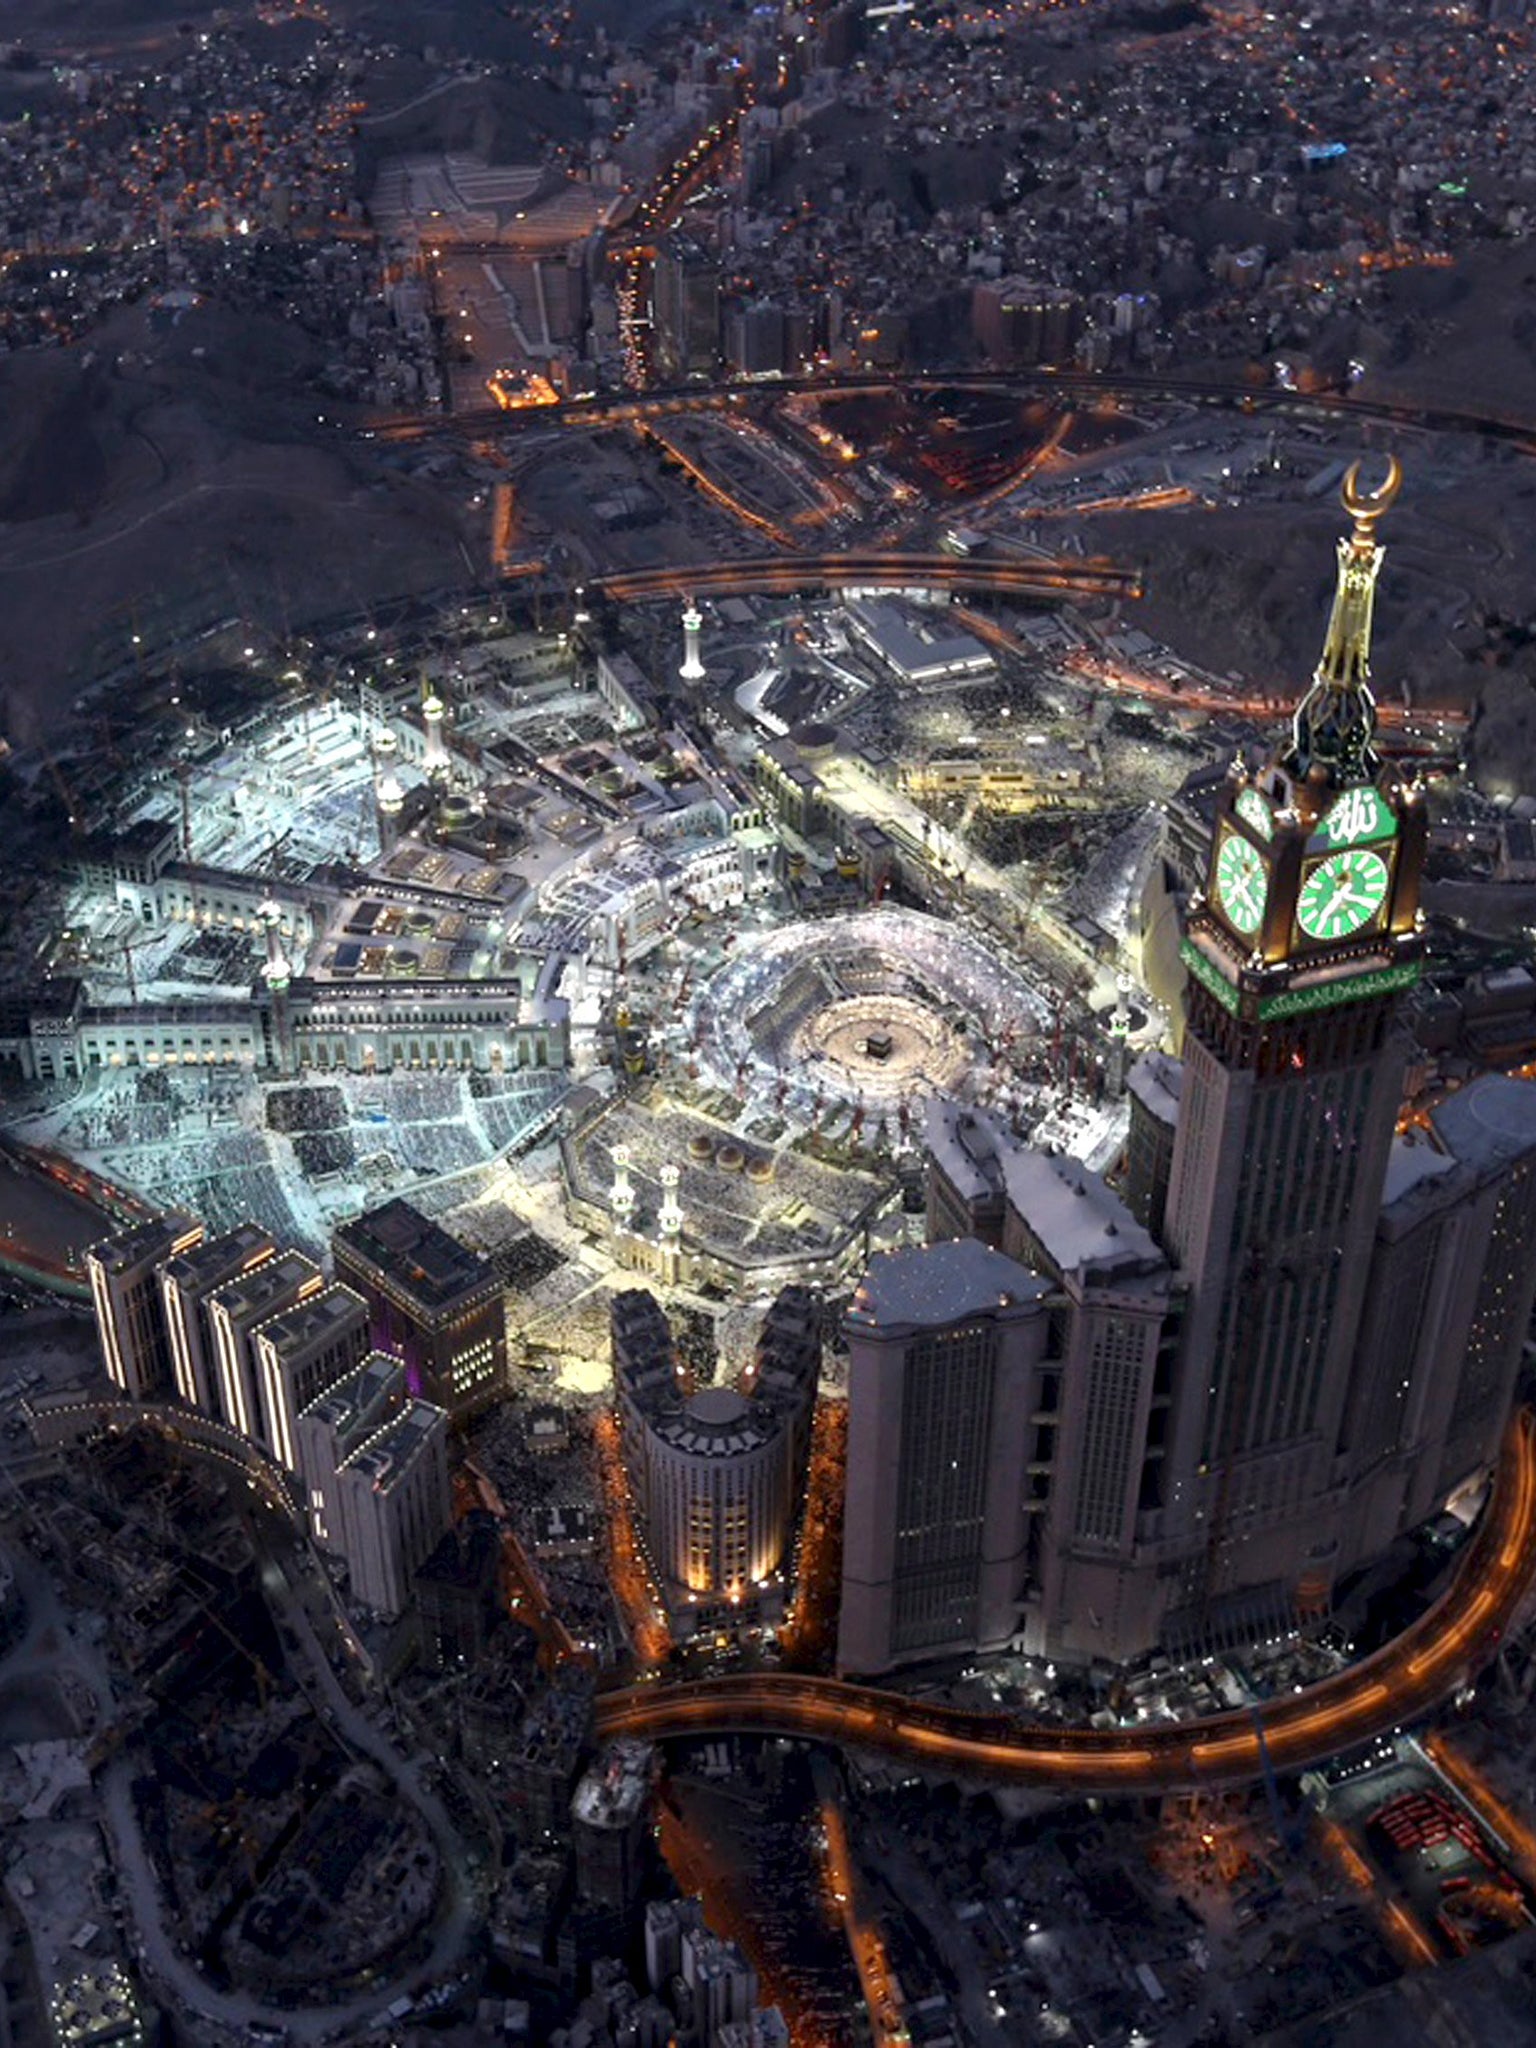 Millions of Muslims journey to Mecca every year for the culmination of the holy night of Ramadan. The Saudi Arabian city’s population almost trebles during the festivities